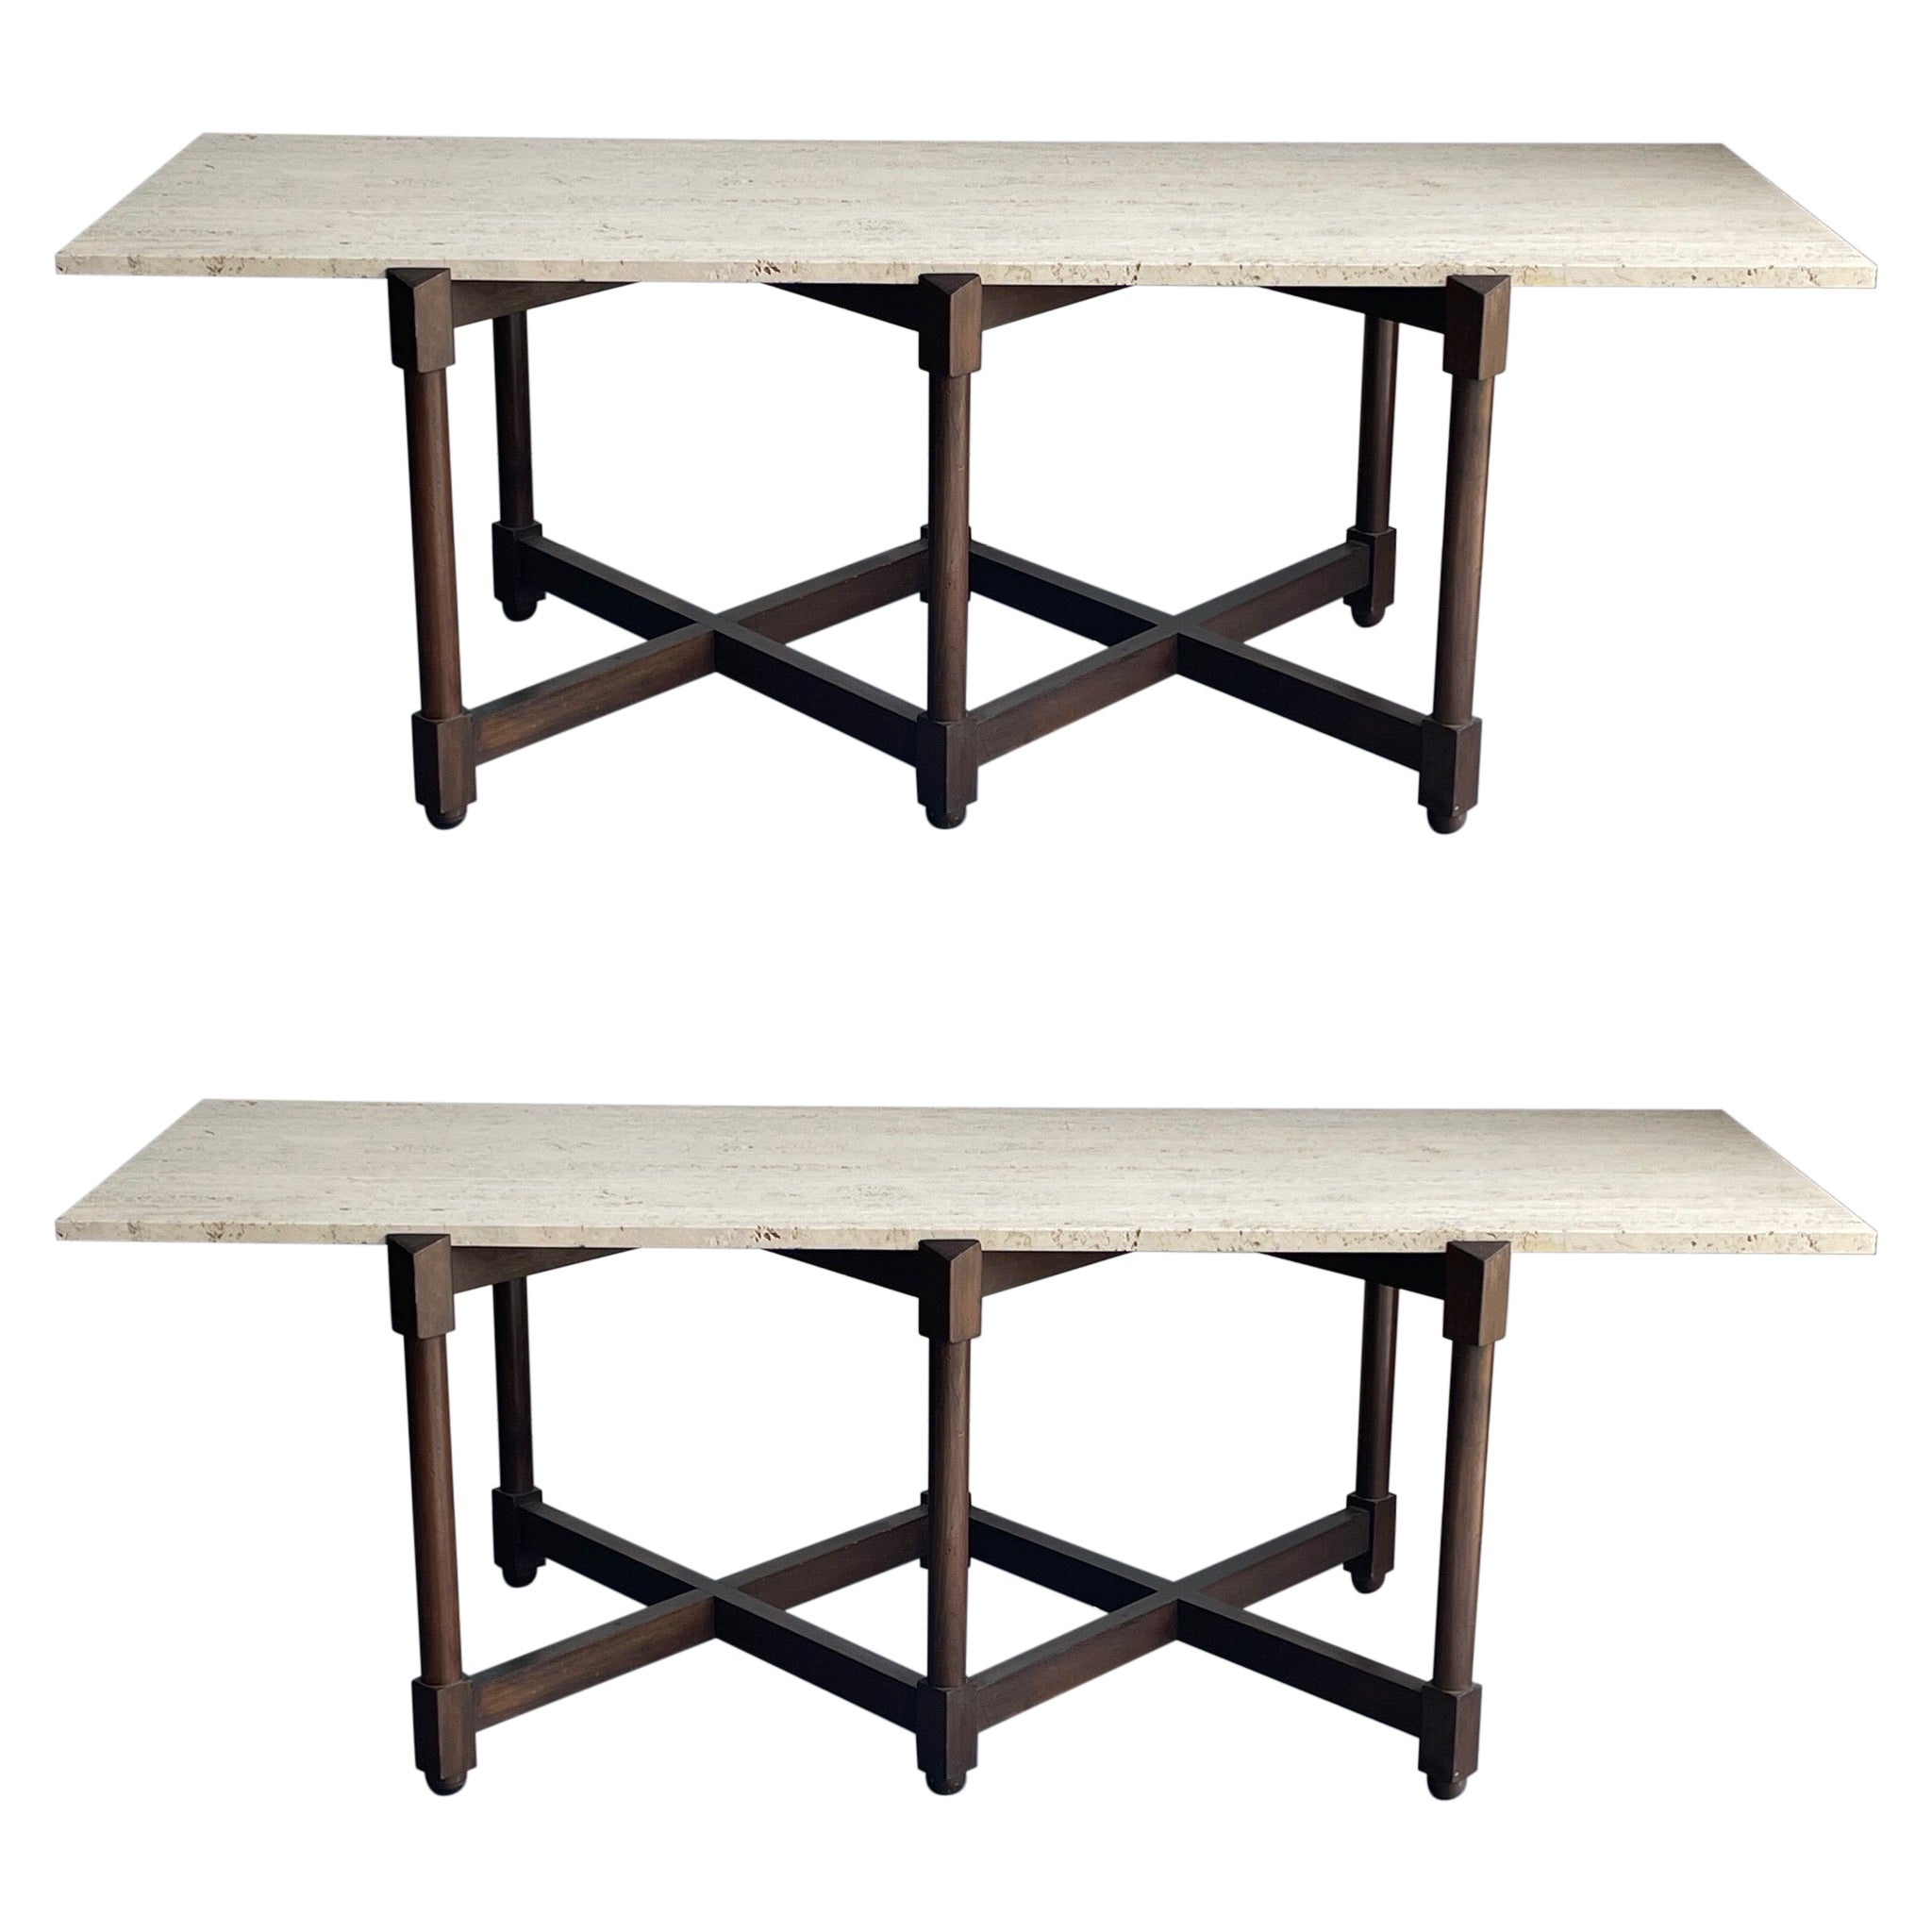 Pair Sofa / Console Tables with Travertine Tops Attr. to Edward Wormley/ Dunbar